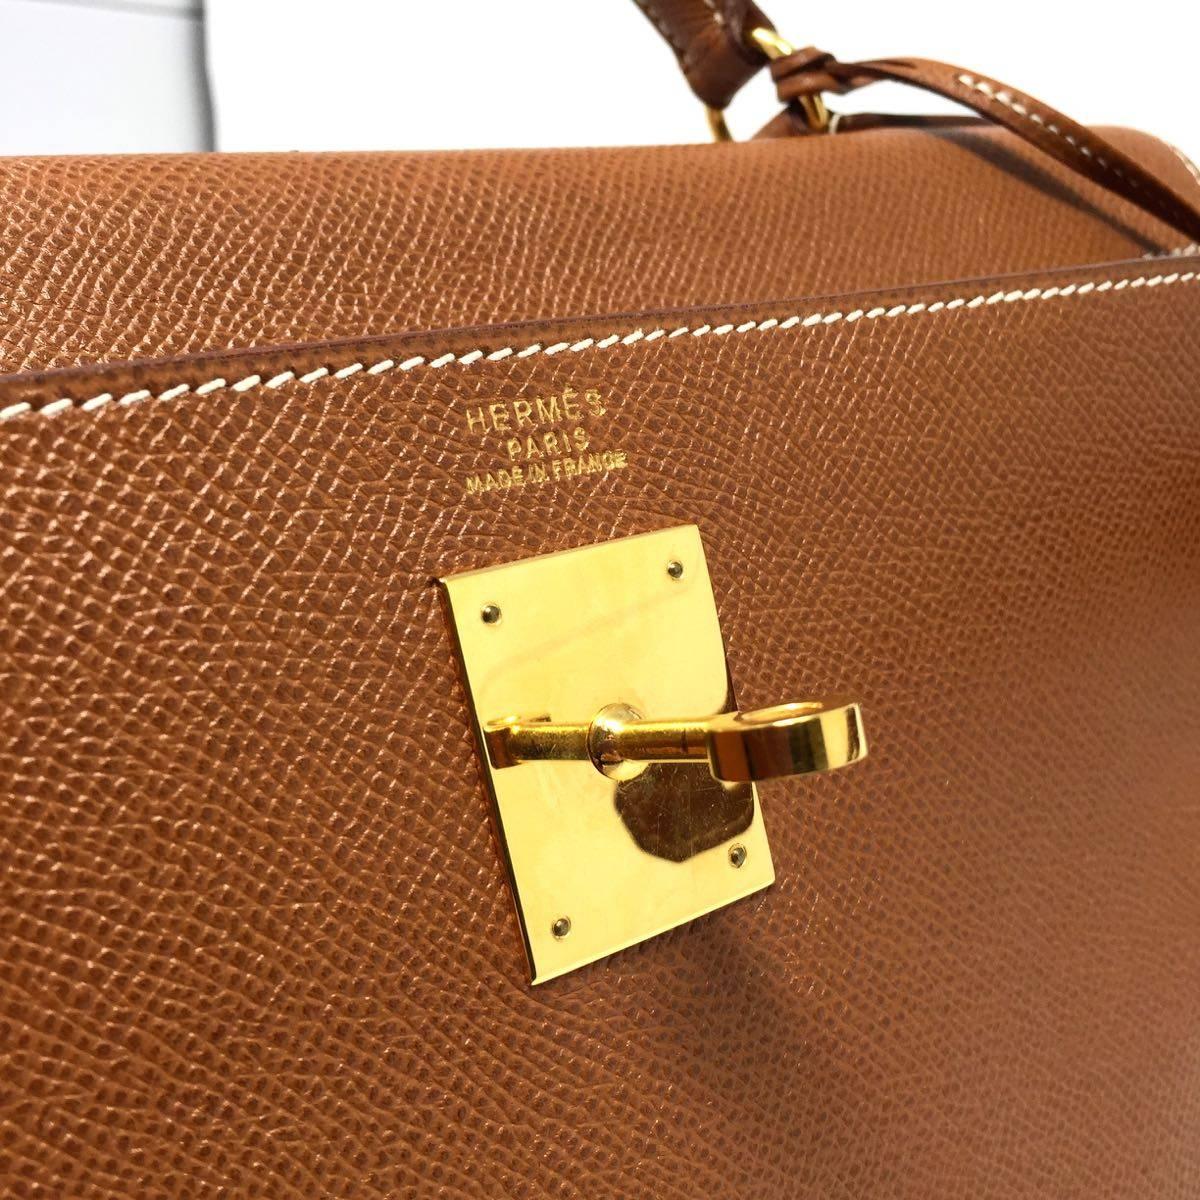 1992, HERMES Vintage  Sac Kelly 32 bag in Courchevel Gold Leather.  1